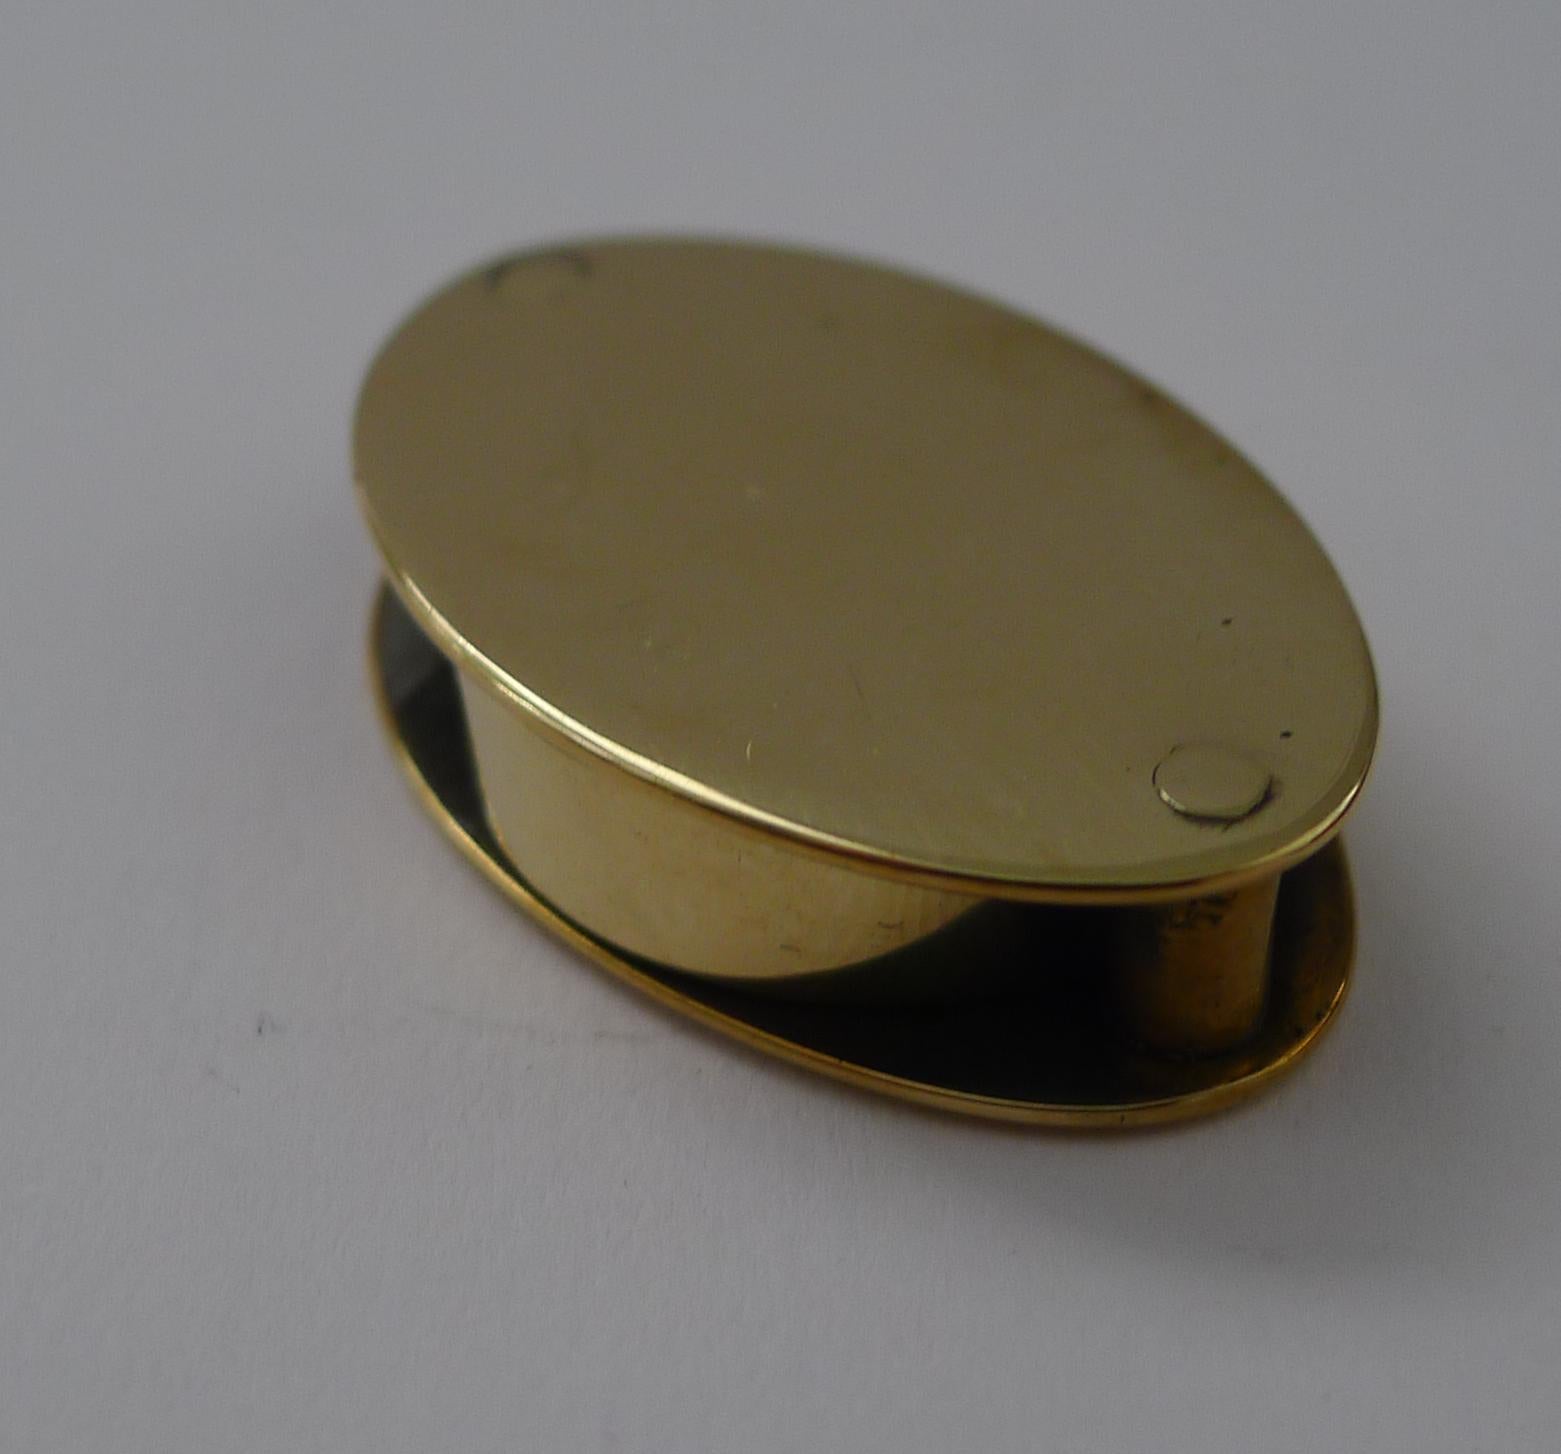 A small folding magnifying glass or loop, made from solid English brass dating to c.1920.

One lens sits nicely between the back and front panels folding away while unused, fitting into the pocket.

Excellent condition measuring 1 1/2